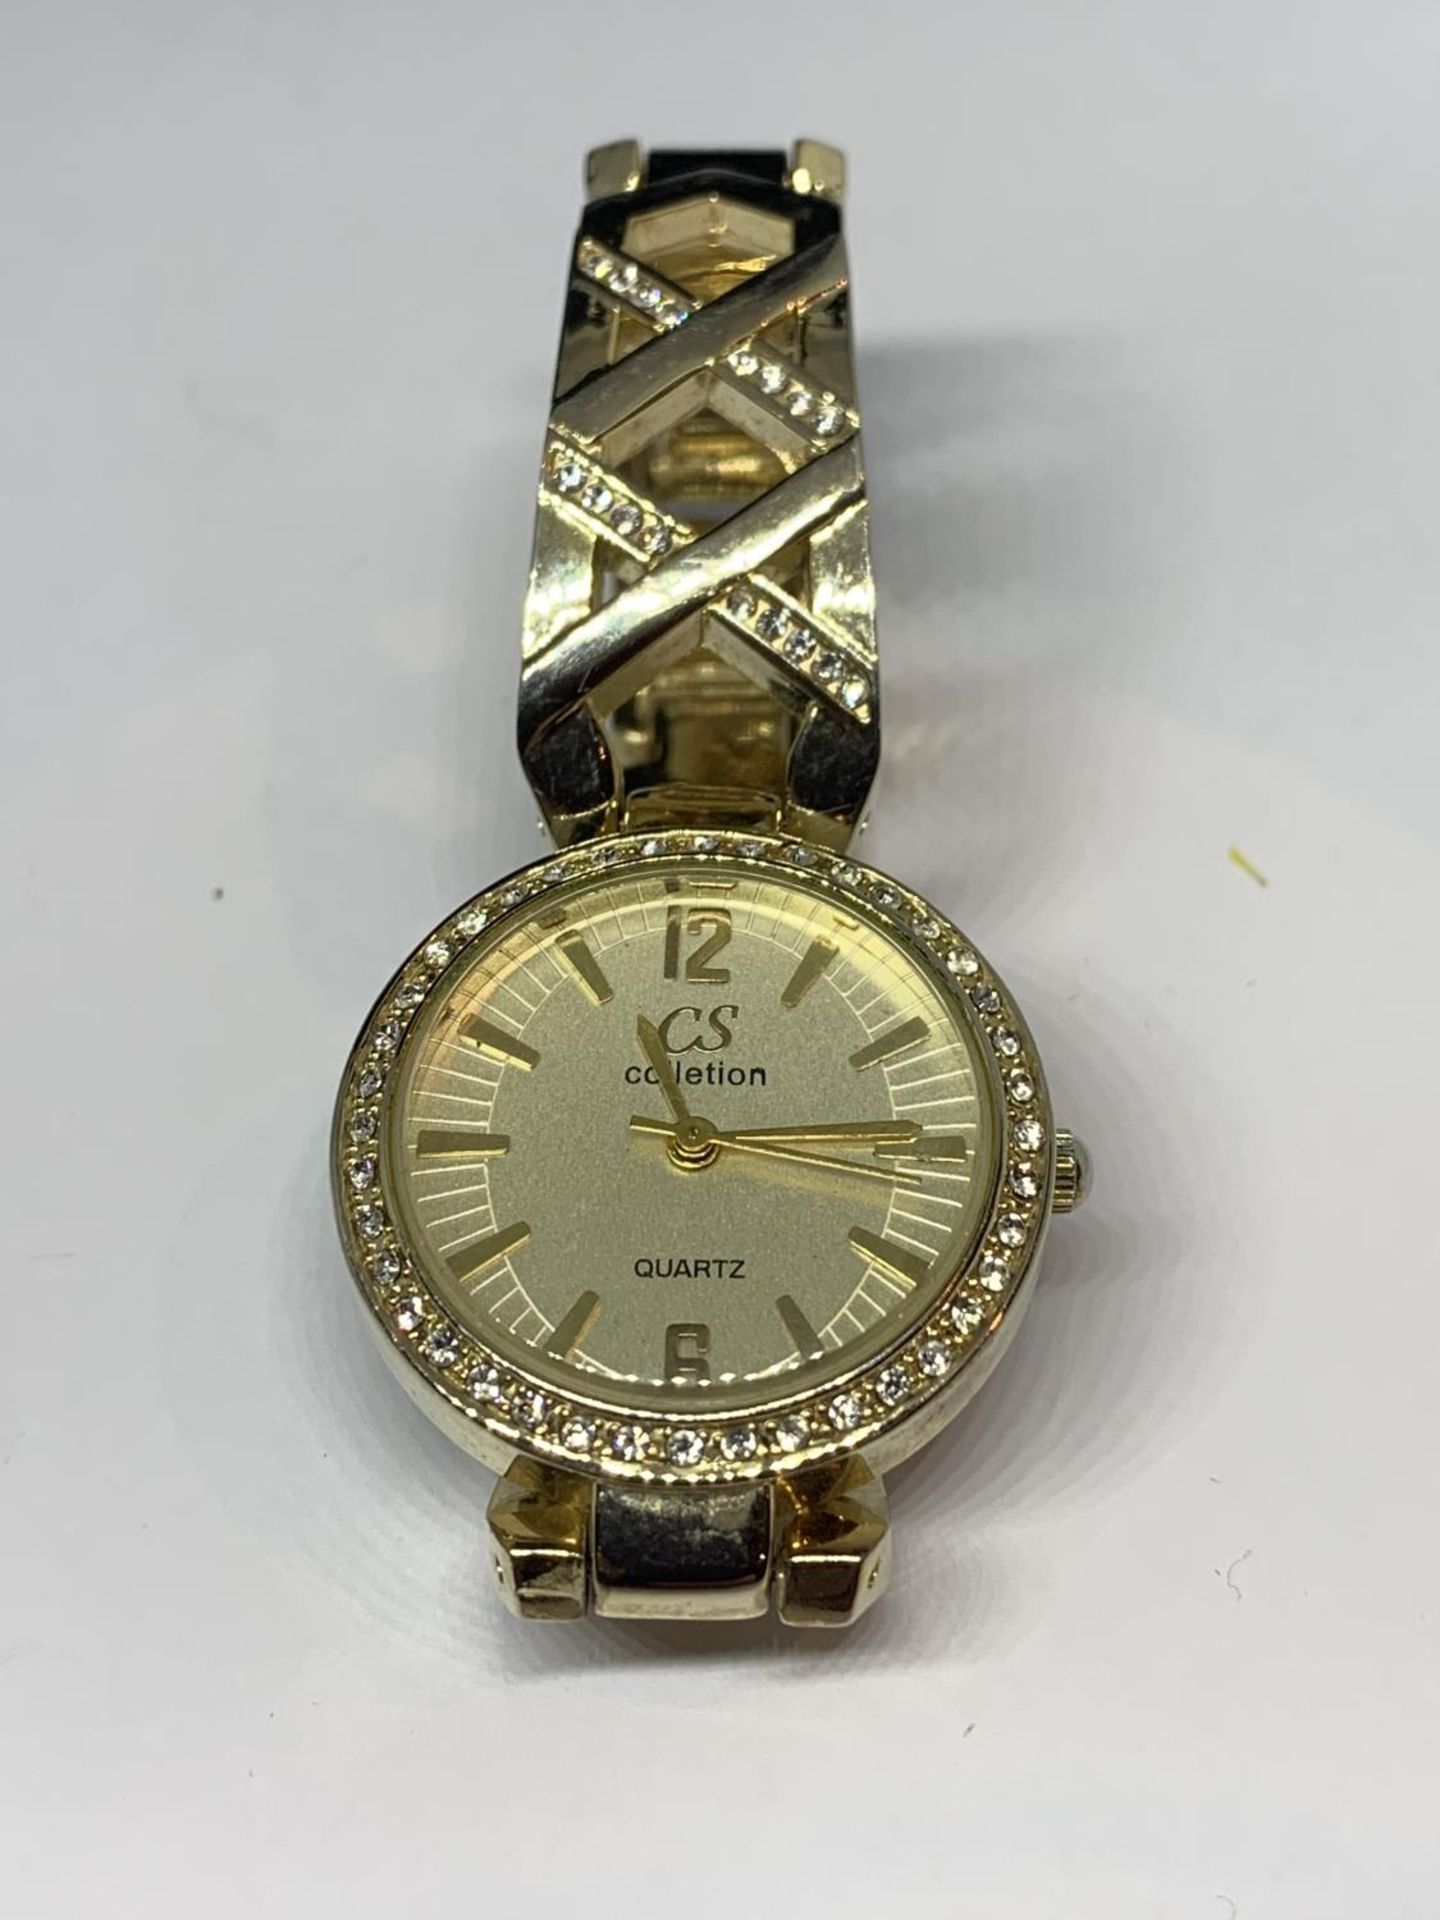 TWO DECORATIVE WRIST WATCHES WITH CLEAR STONE DECORATION ONE WITH A RECTANGULAR FACE AND A - Image 2 of 4